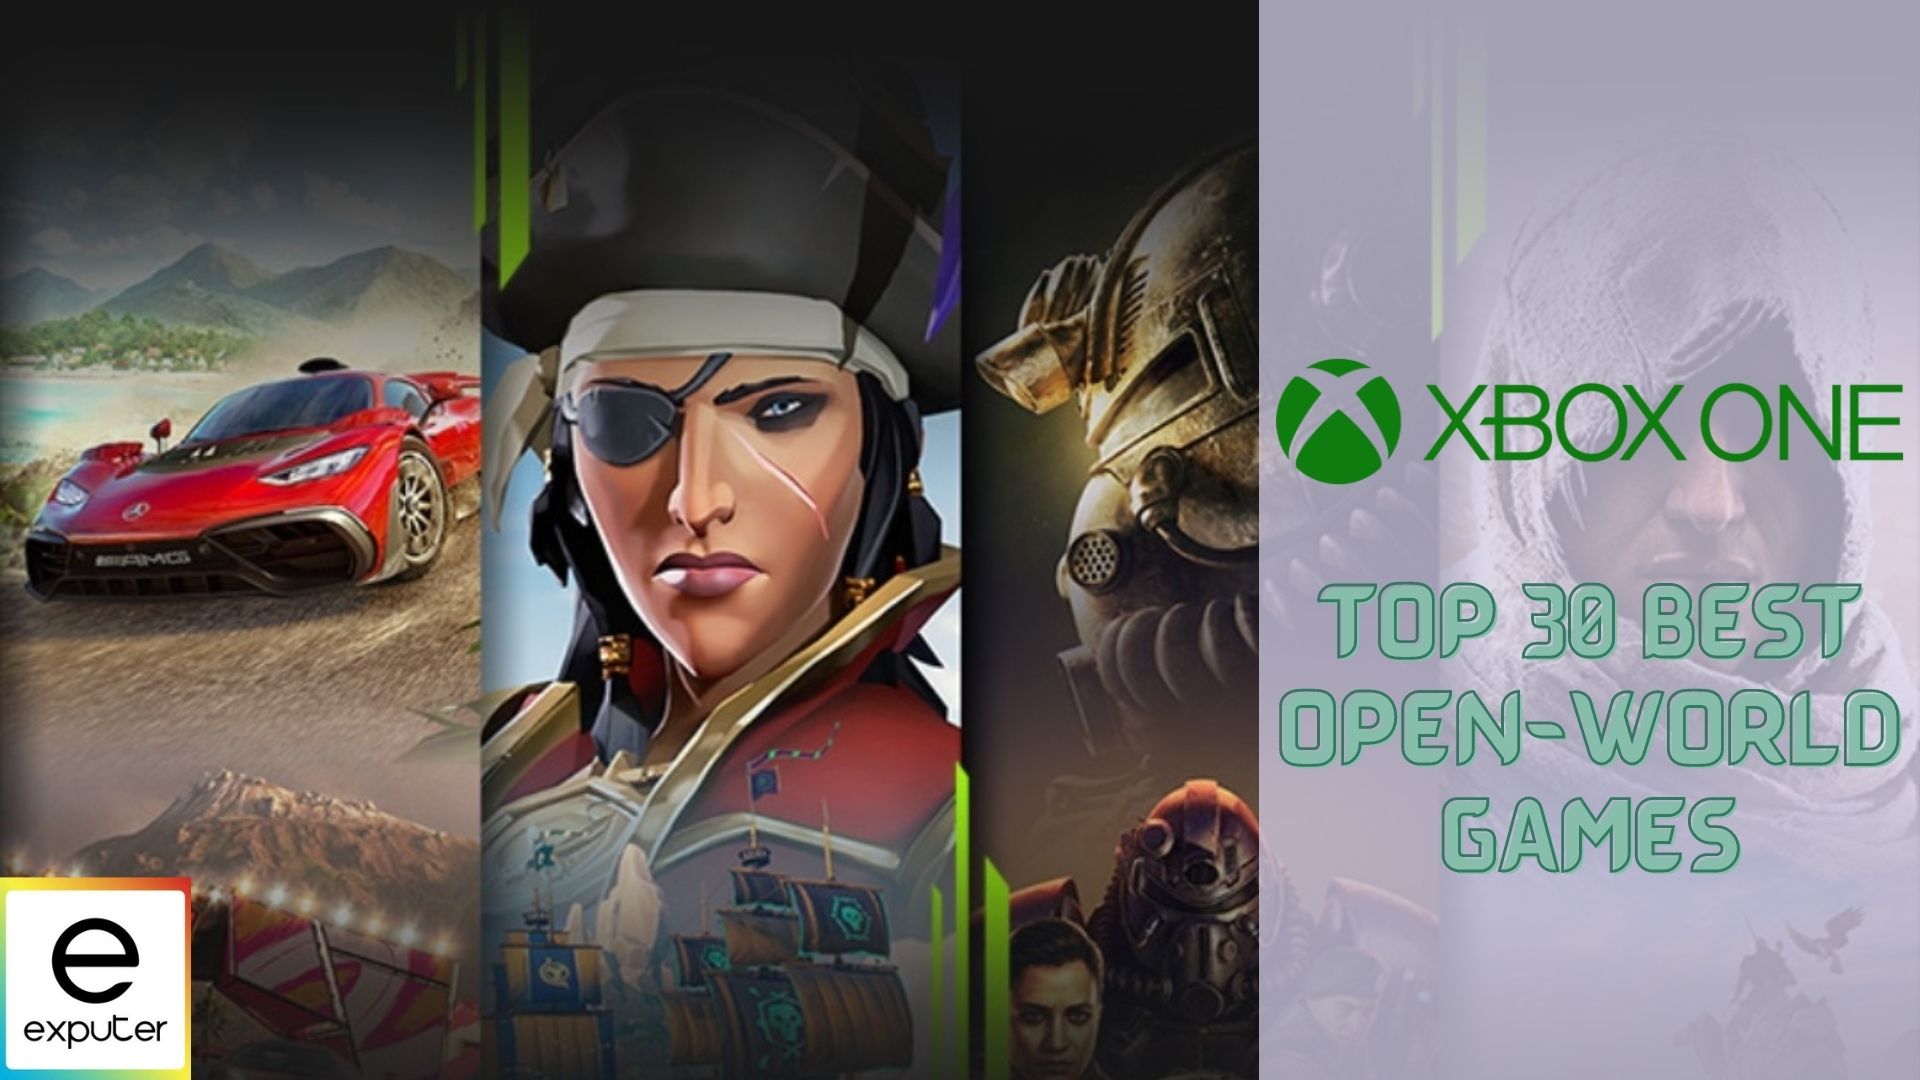 30 BEST Open World Games For Xbox One - eXputer.com